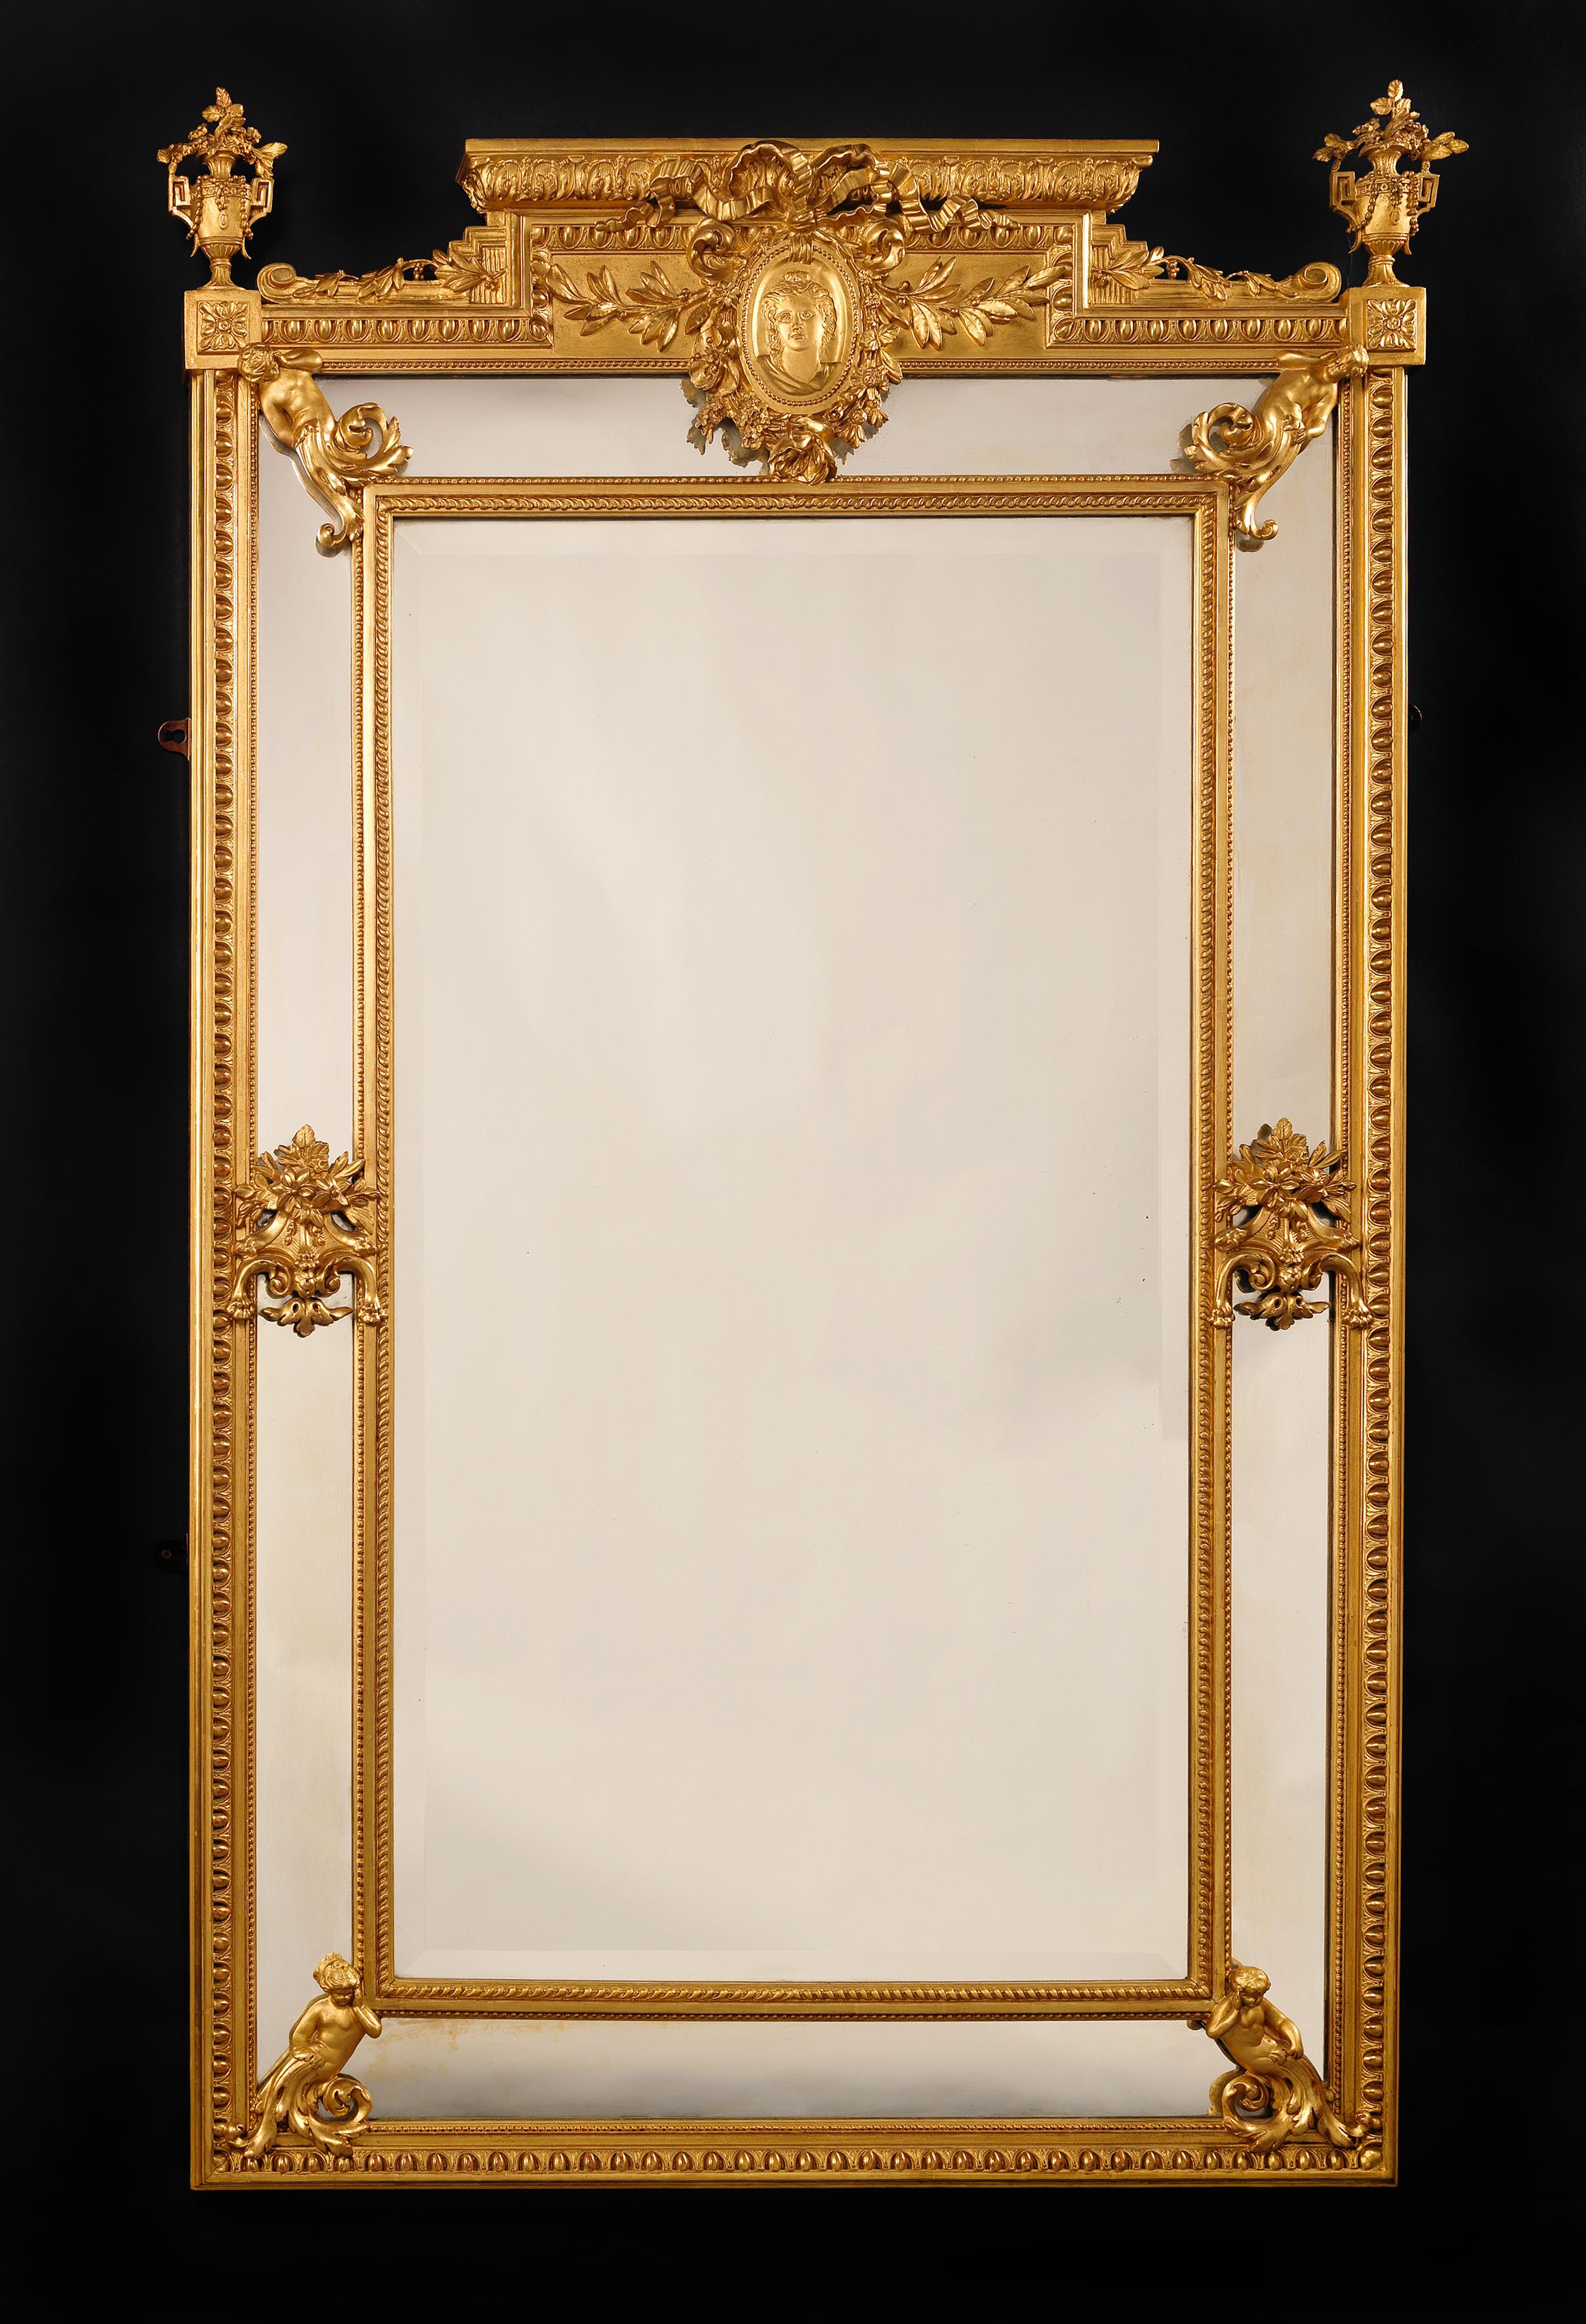 A very fine Louis XVI style carved giltwood and composition marginal mirror. 

French, circa 1890. 

This fine mirror has a gadrooned, beaded and egg-and-dart border. It is decorated with cherubs to the corners and centred by an elaborate